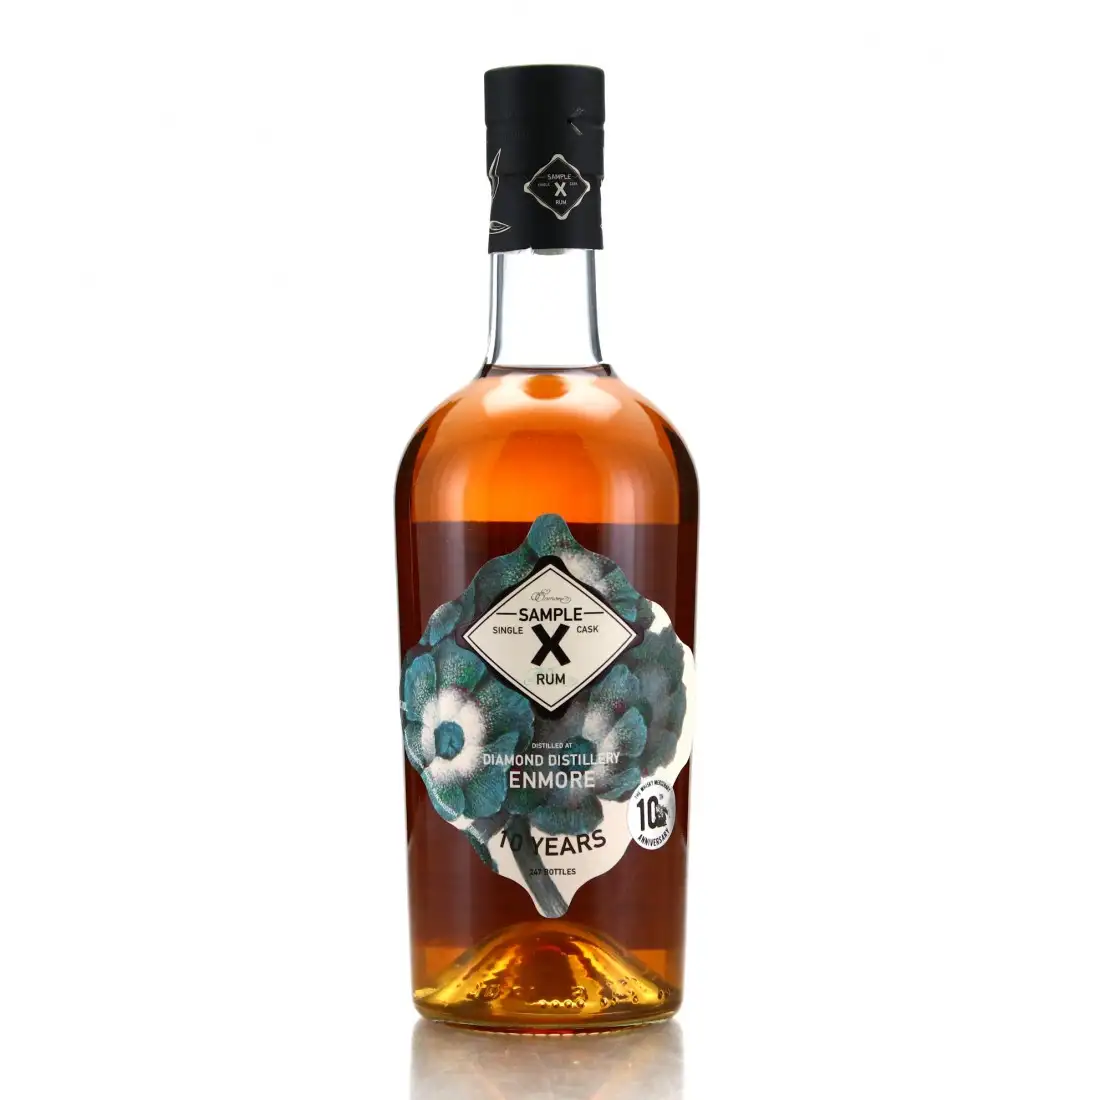 Image of the front of the bottle of the rum Sample X Enmore